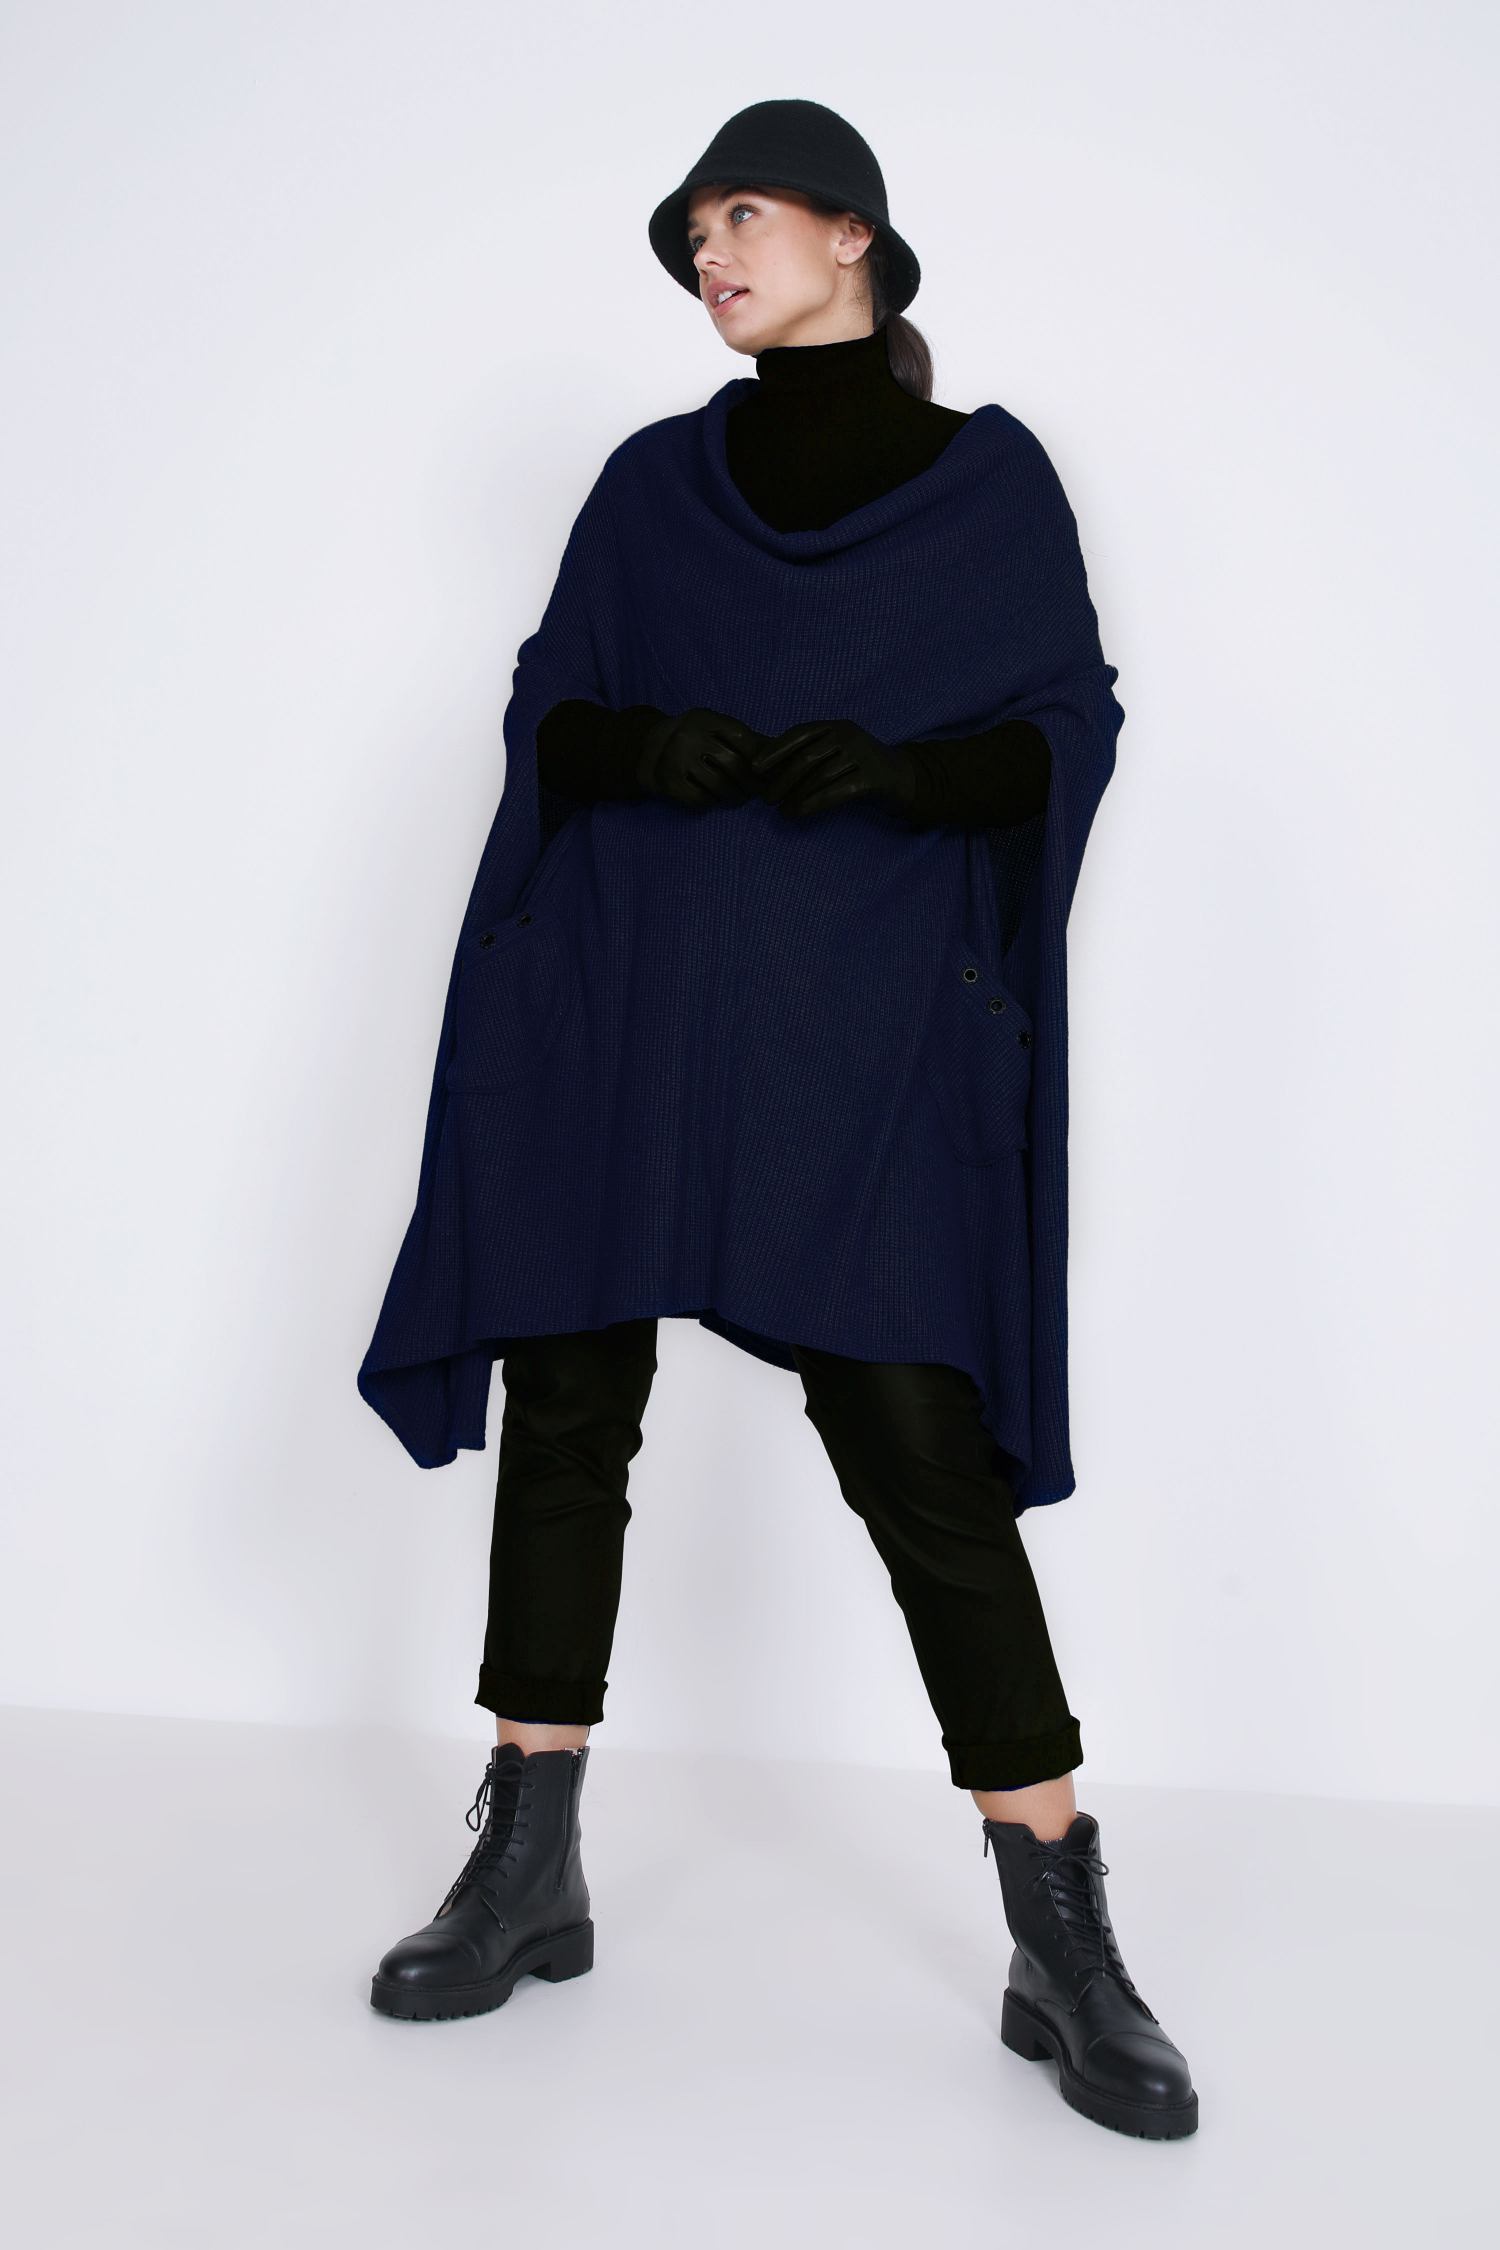 Pancho with wide plain knit collar